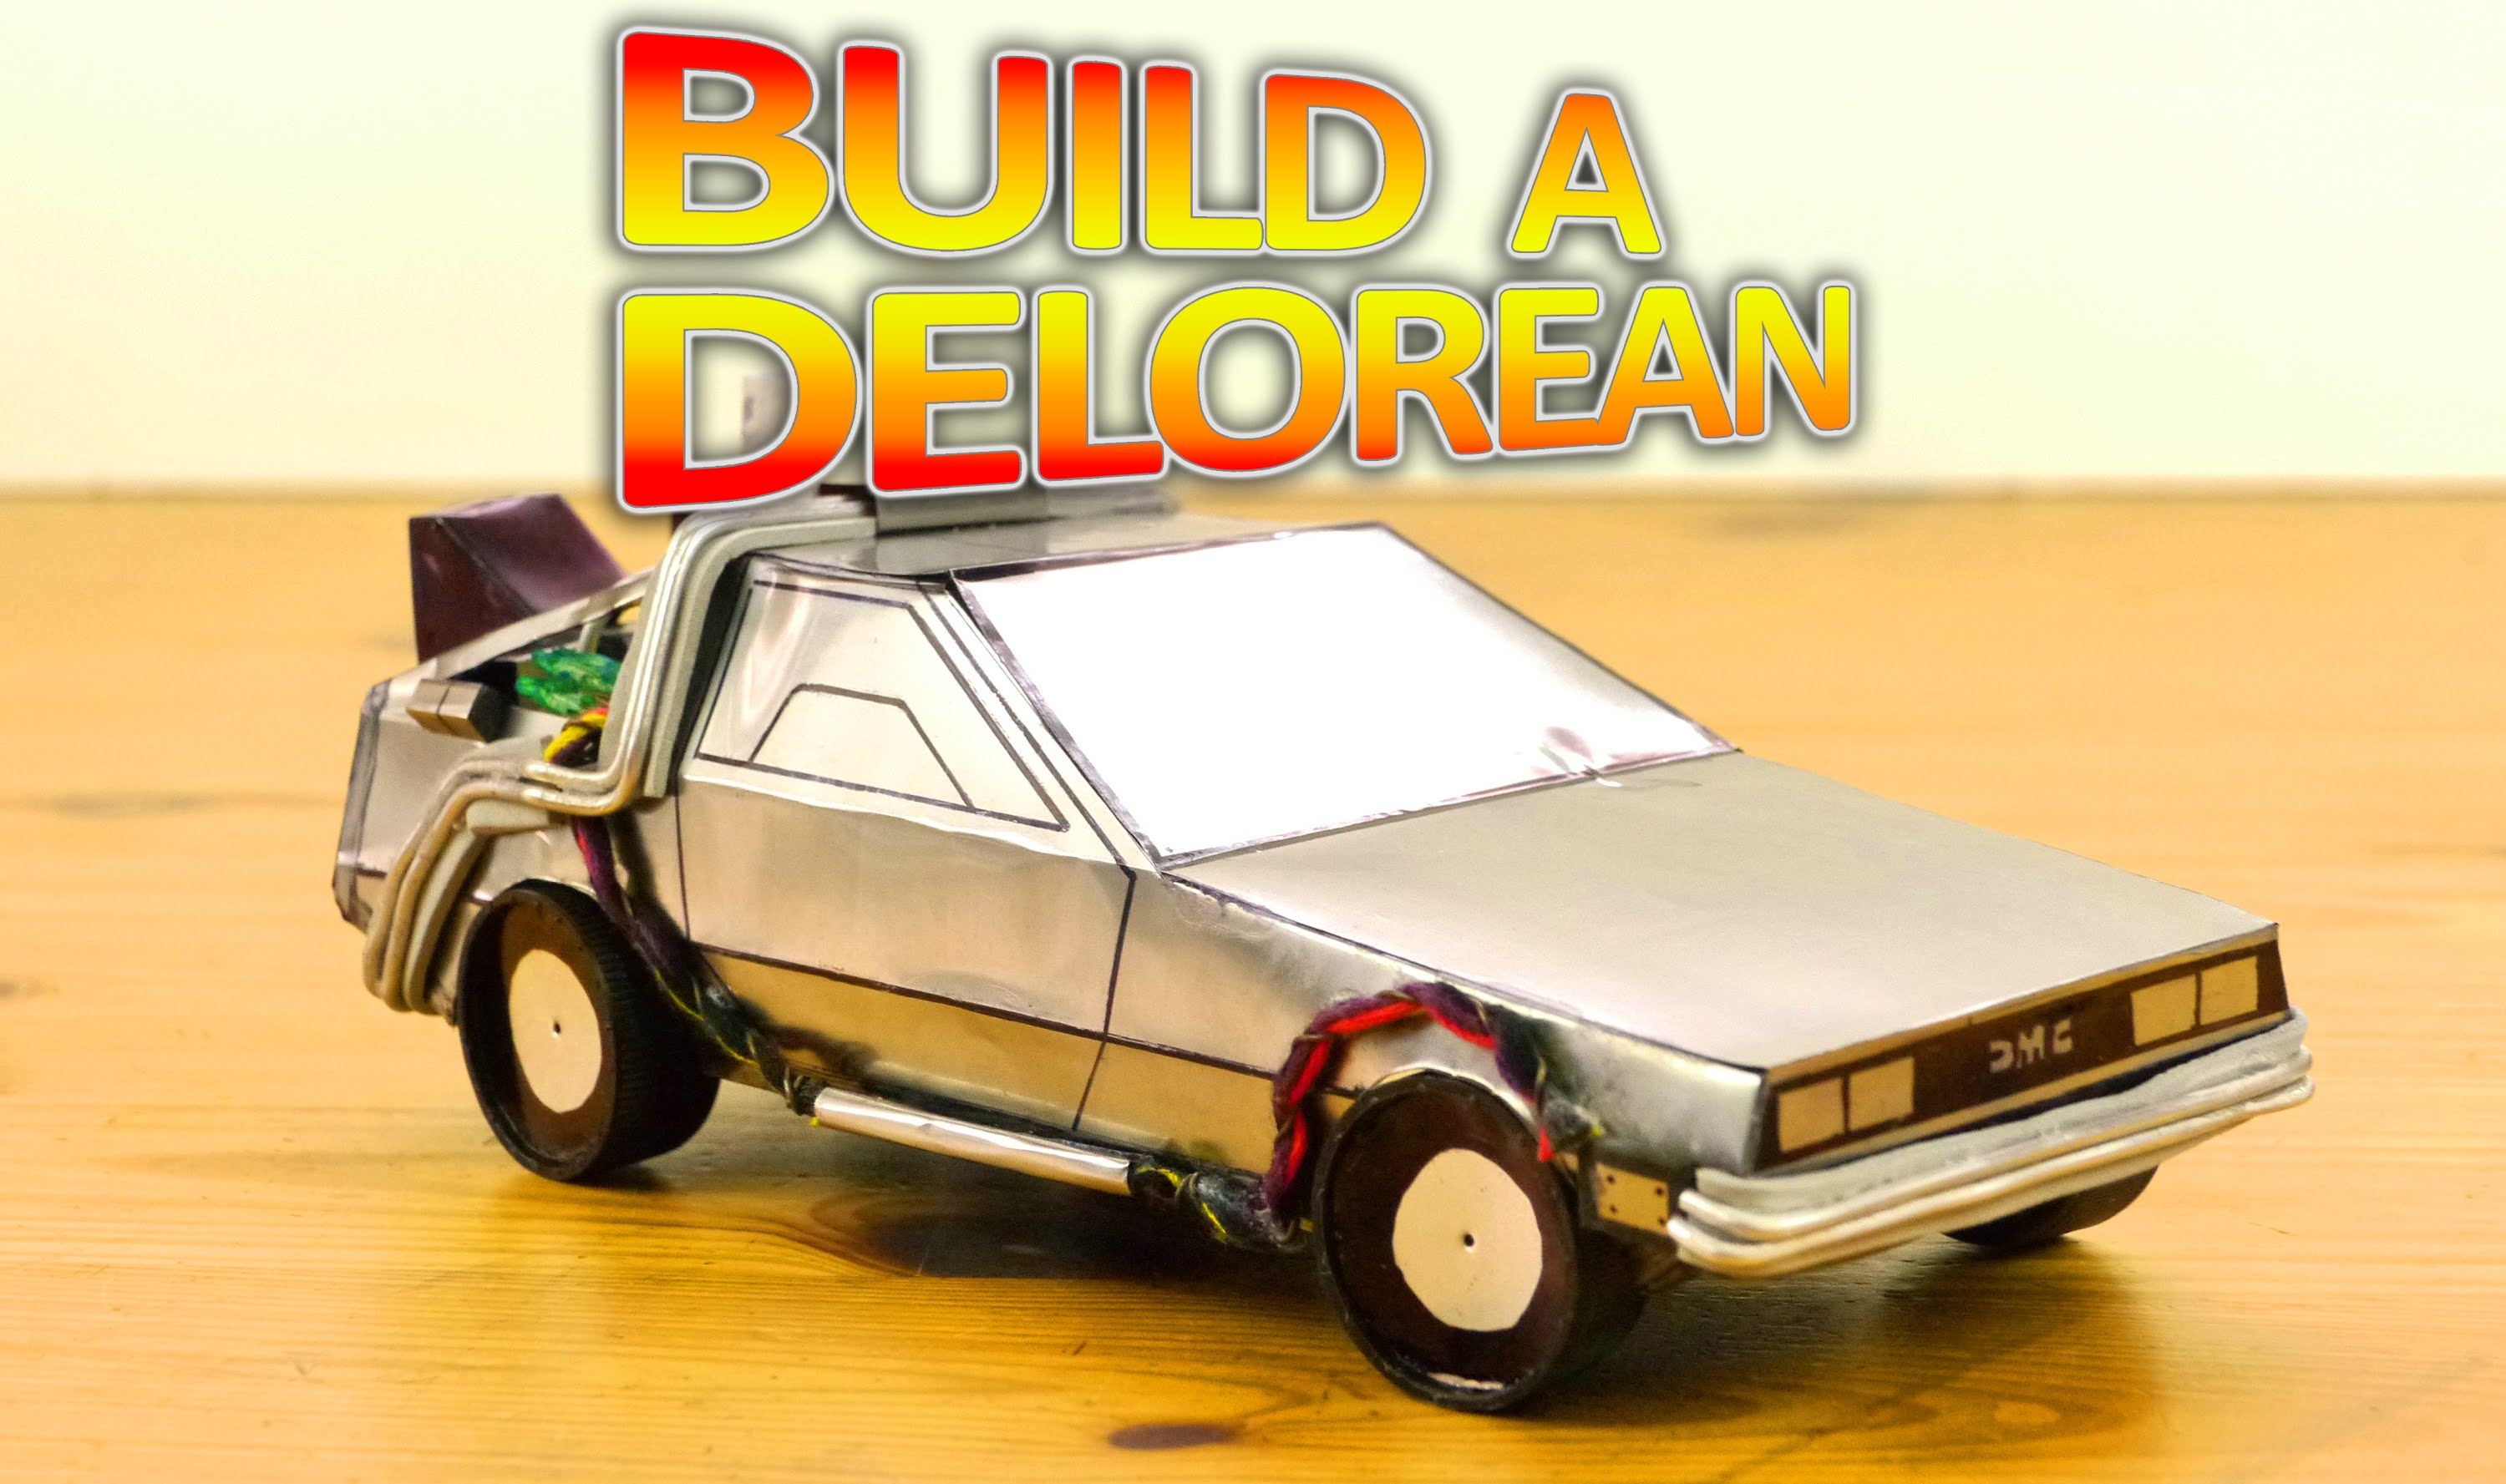 Back To The Future Fans: Make Your Own Delorean Time Machine With A Can